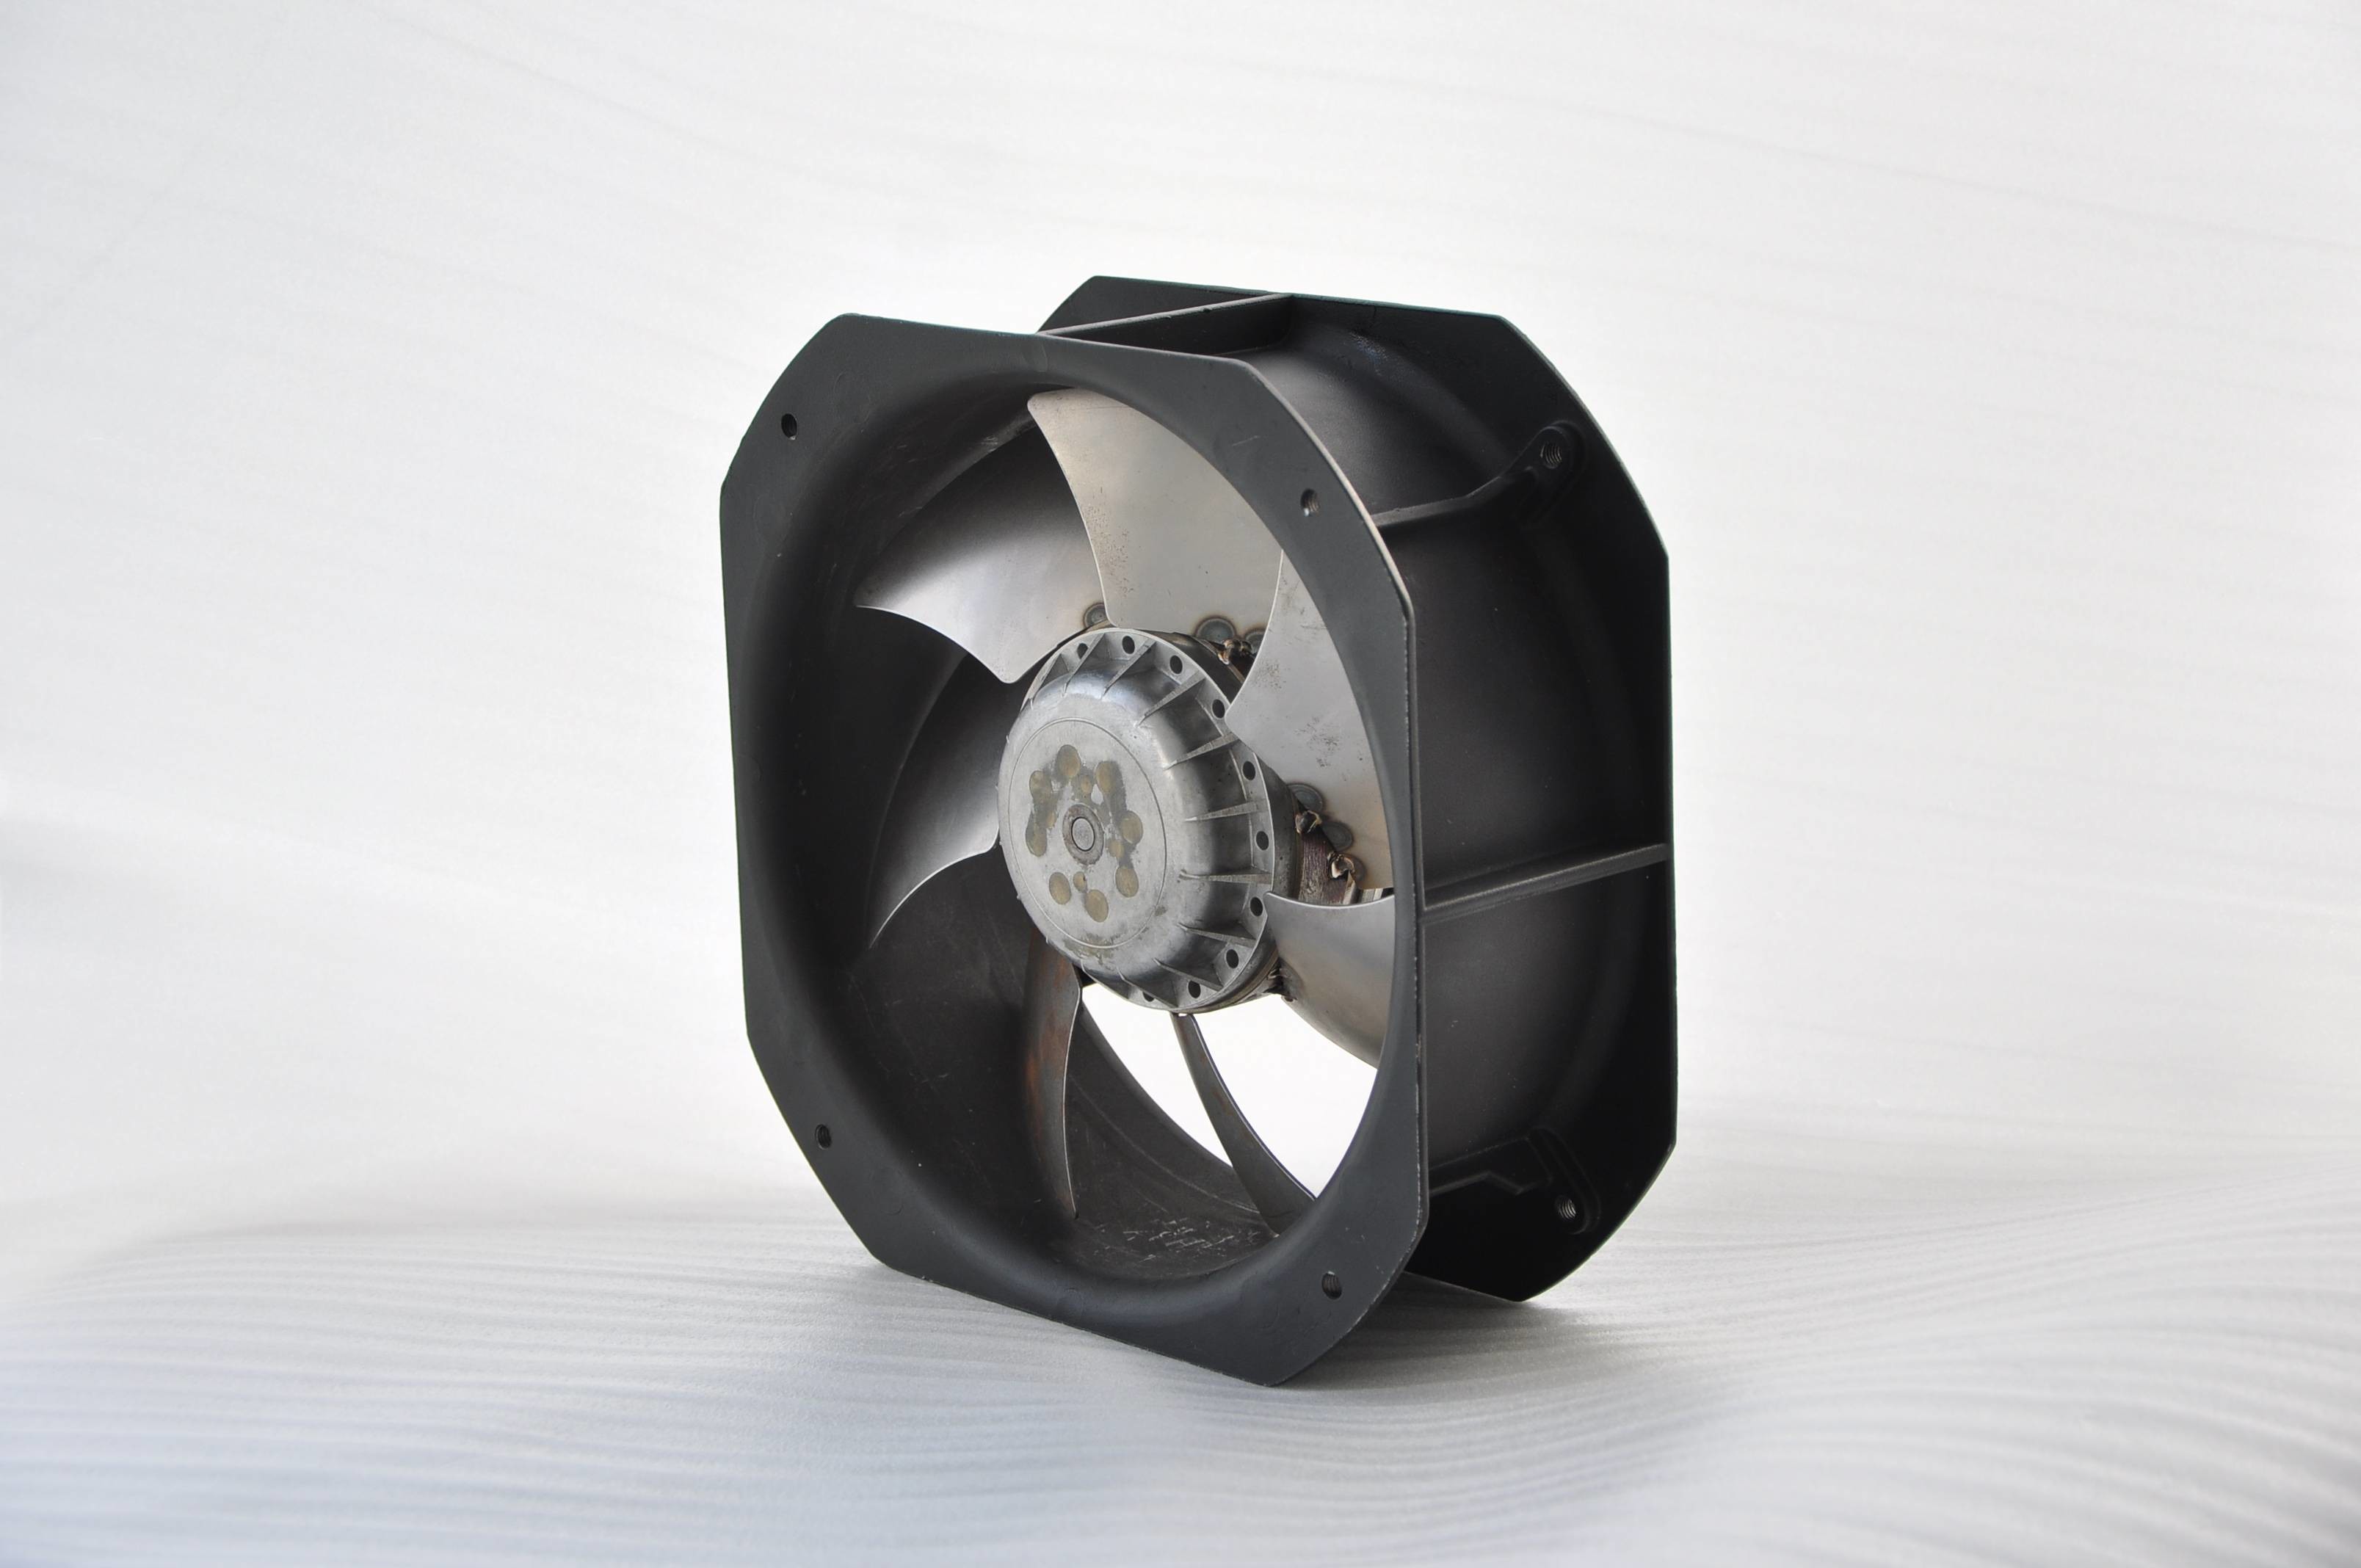  AL Alloy Sickle Blade 910rpm AC Axial Fan With 500mm Blade Manufactures